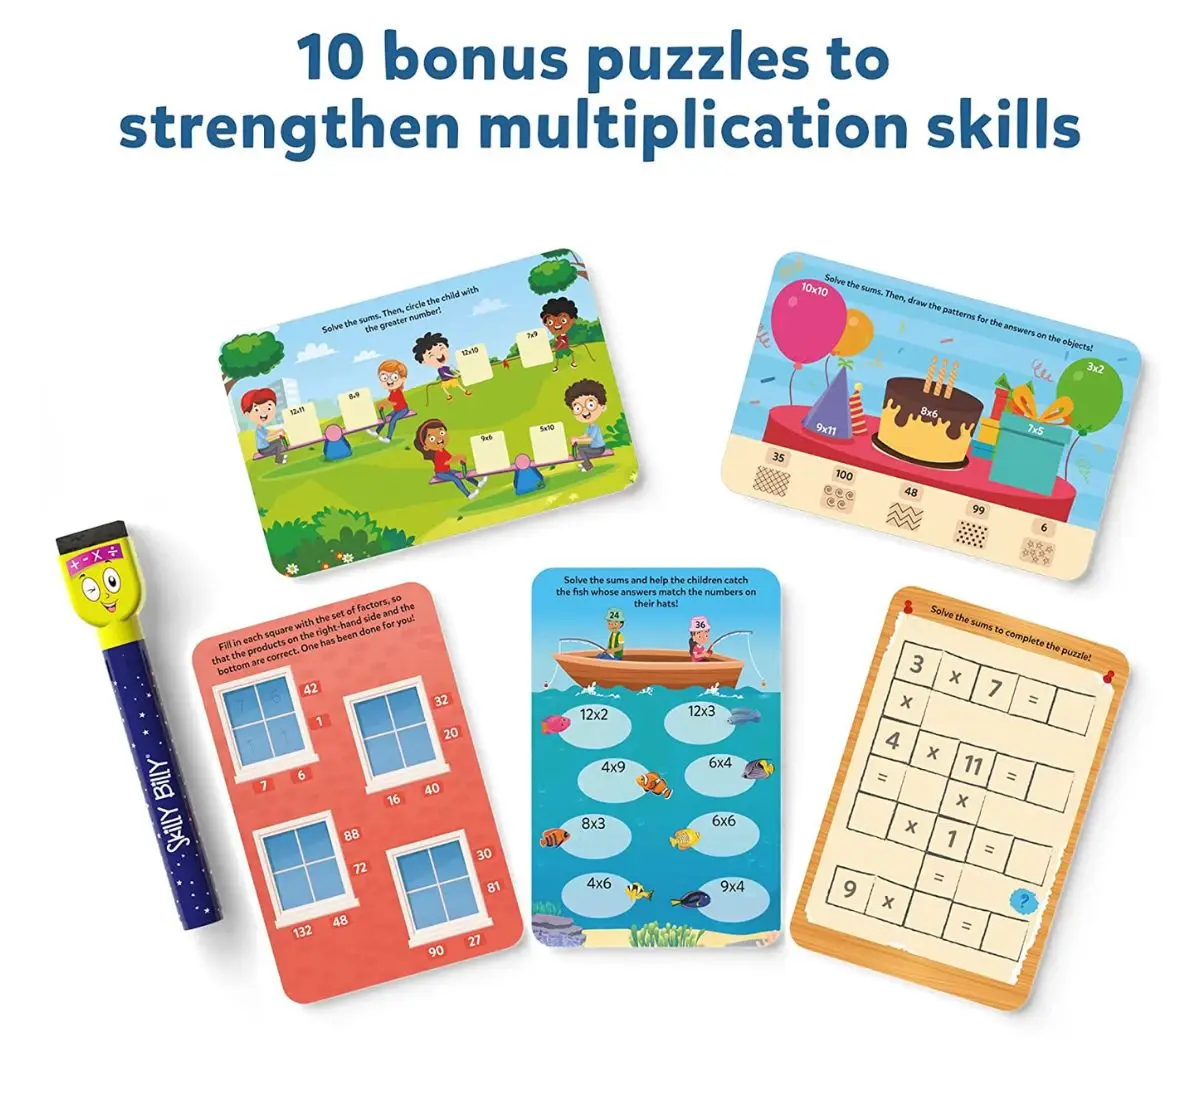 Skillmatics Multiplication Flash Card - 169 Cards with Dry Erase Marker, 2nd to 6th Grade Math Practice, Bonus Puzzles, Tips, Tricks, Games & Chart, Multicolour